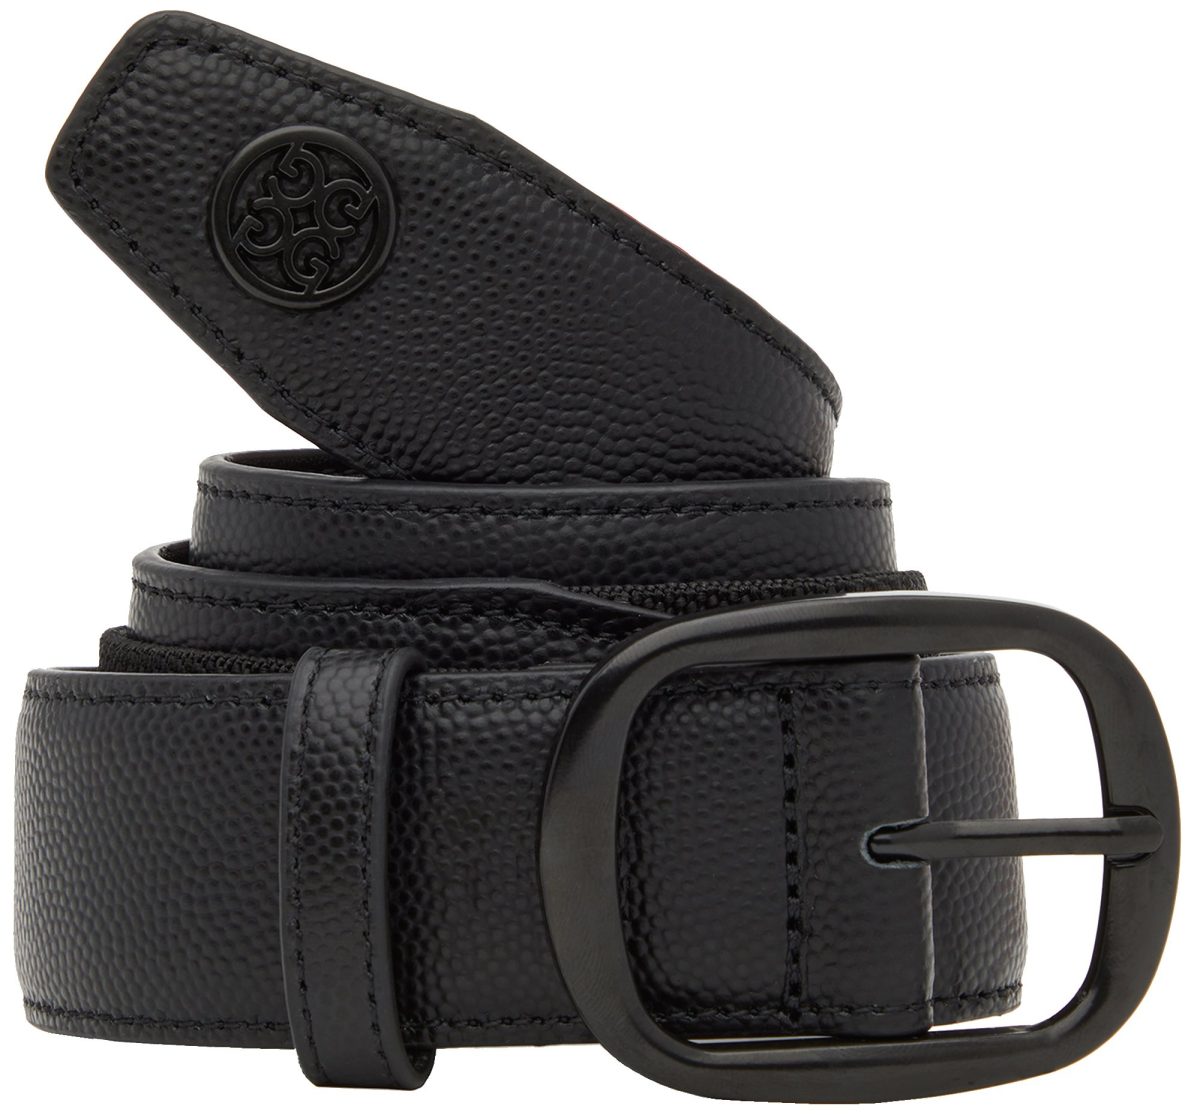 G/FORE Circle Gs Webbed Golf Belt 2024, Nylon/Polyester/Spandex in Onyx, Size 34